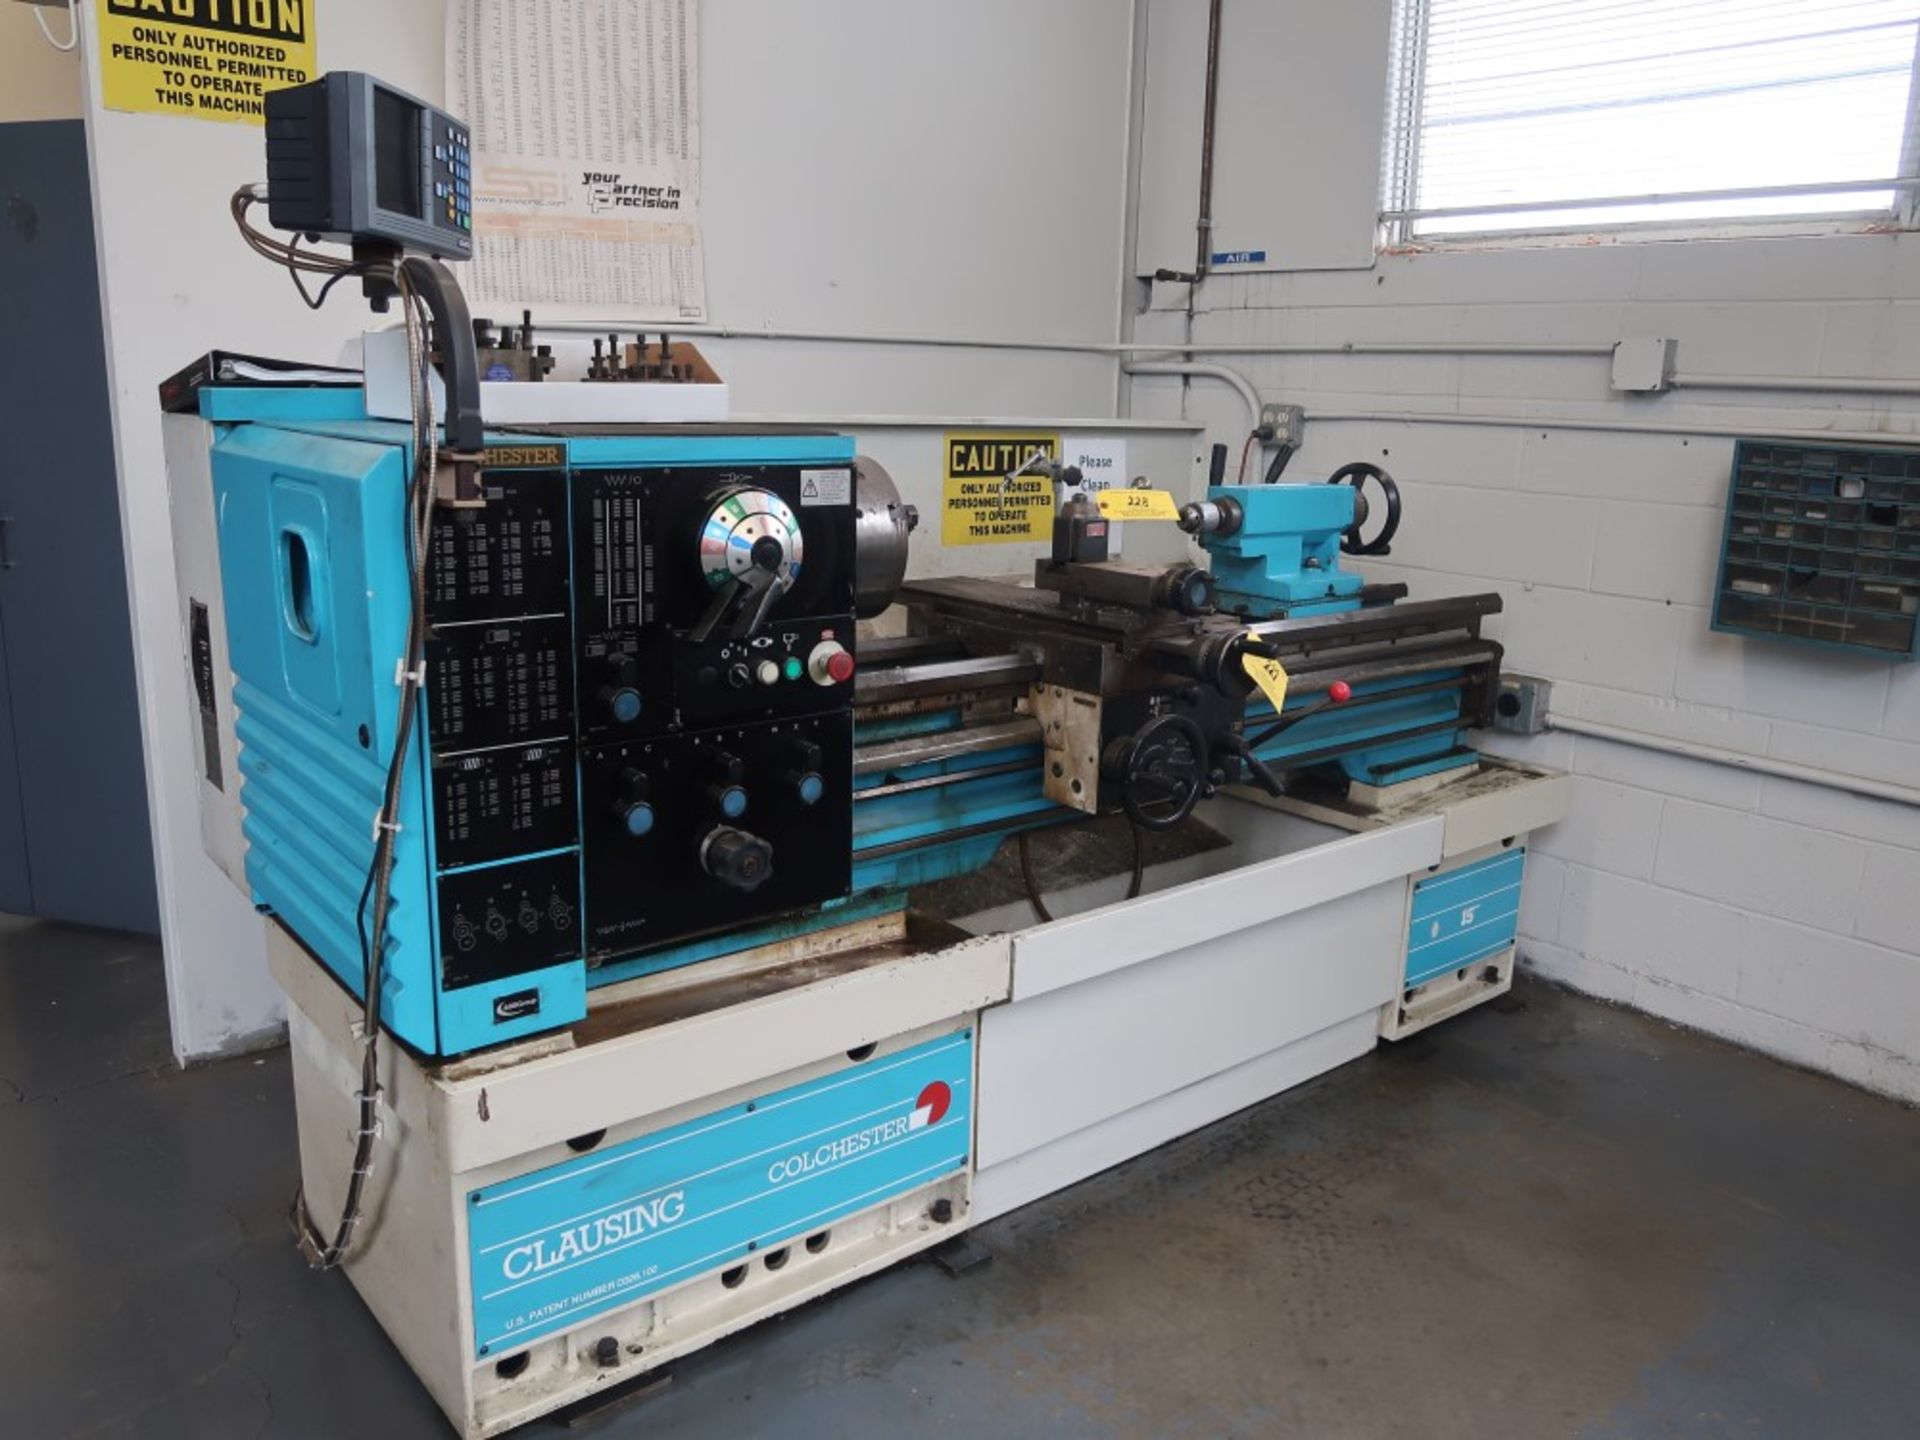 2001 Clausing Colchester 15" Toolroom Lathe S/N CG0152 Spindle Speed 20-2500 RPM w/ Accu-Rite DRO - Image 3 of 8